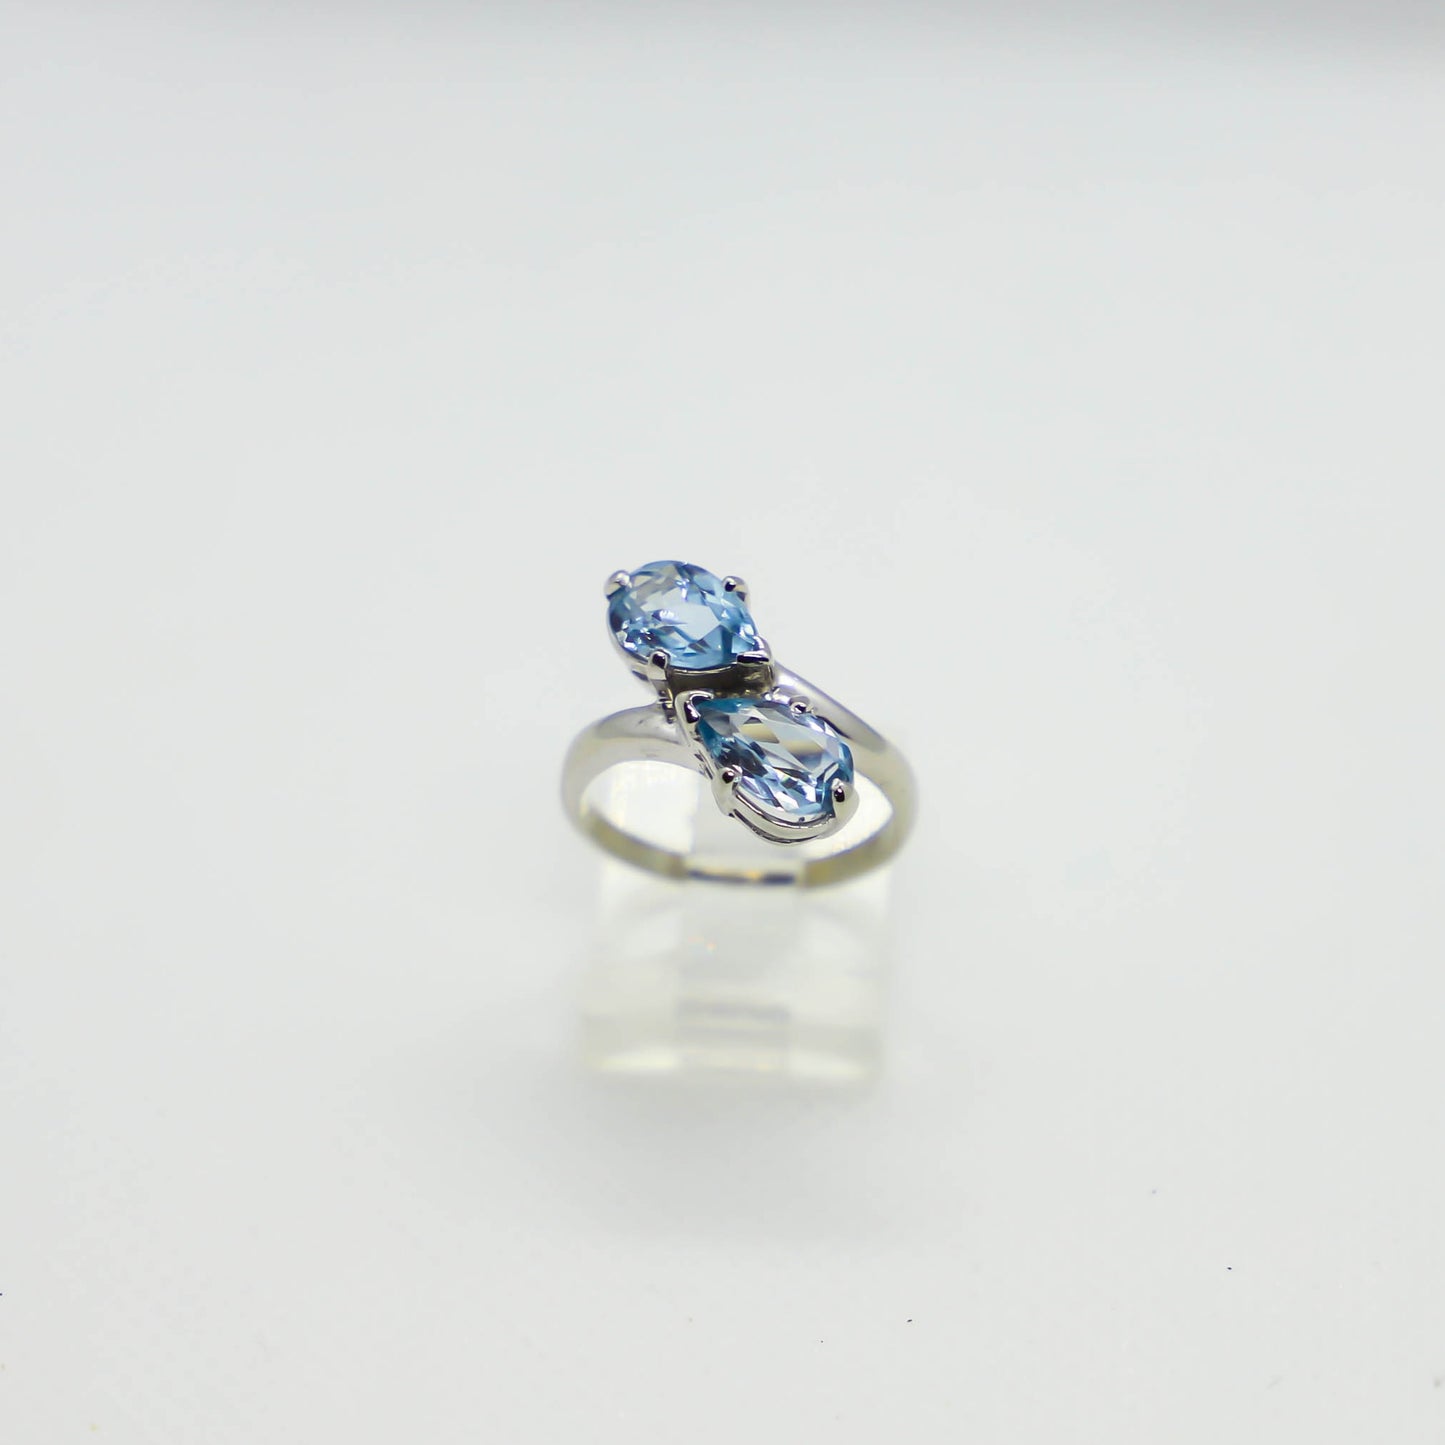 White gold, pear shaped blue topaz ring